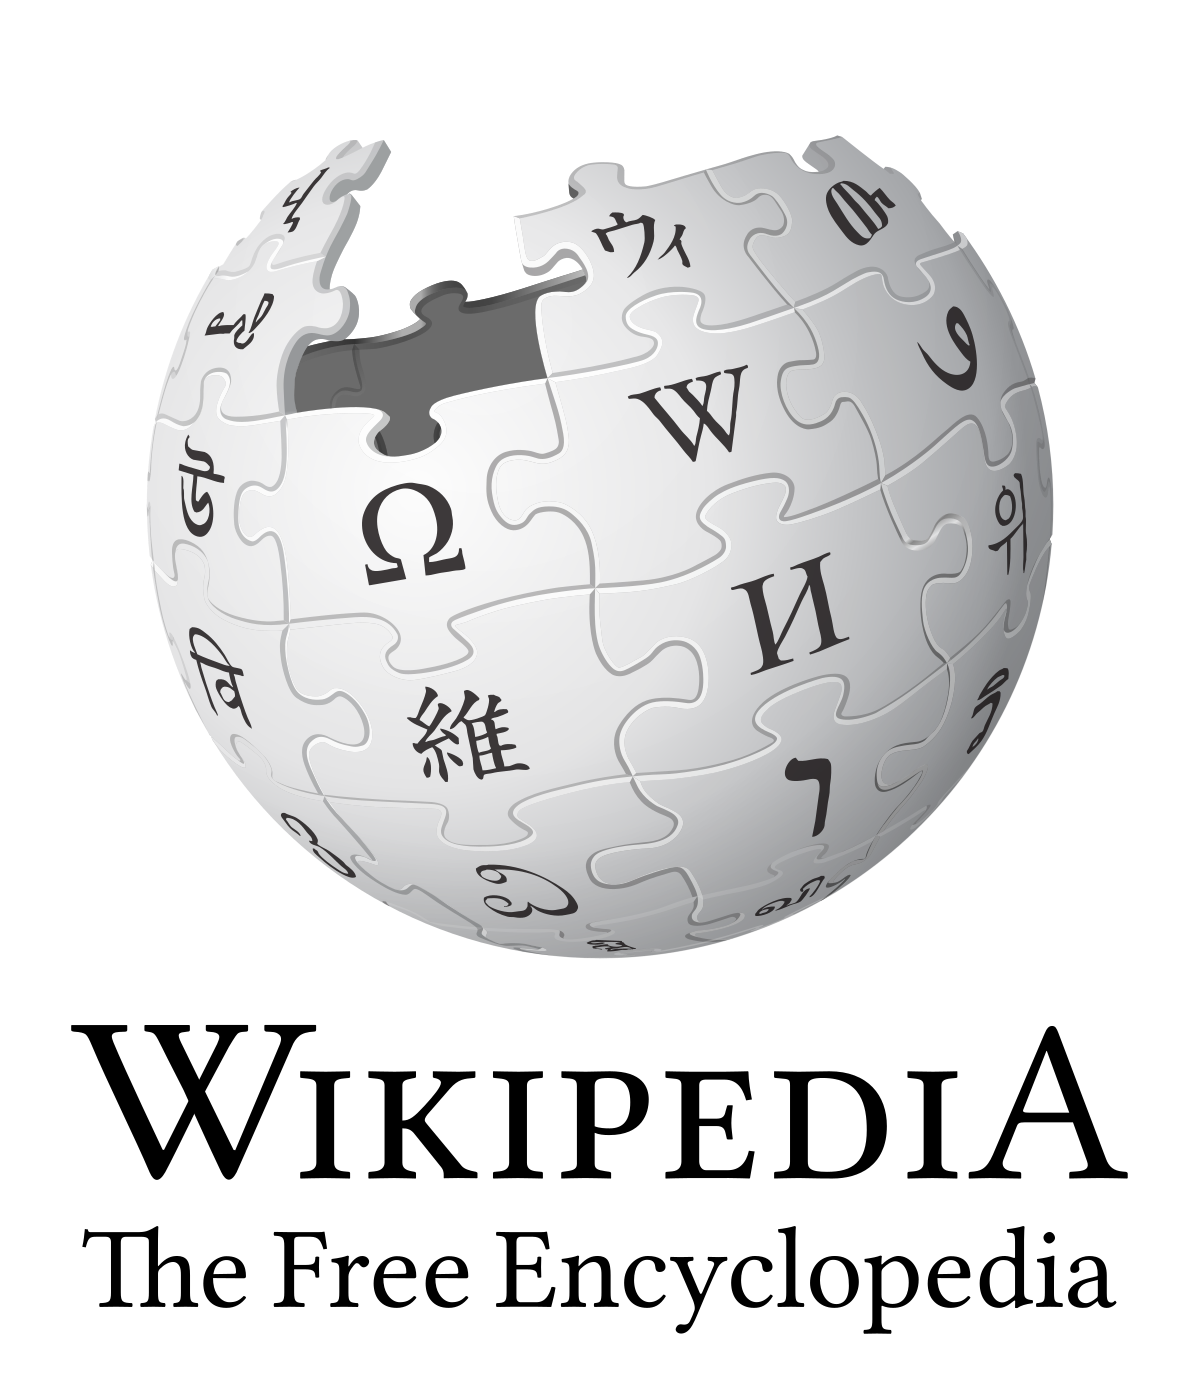 New tool identifies Wikipedia articles ripe for improvement – Wiki Education